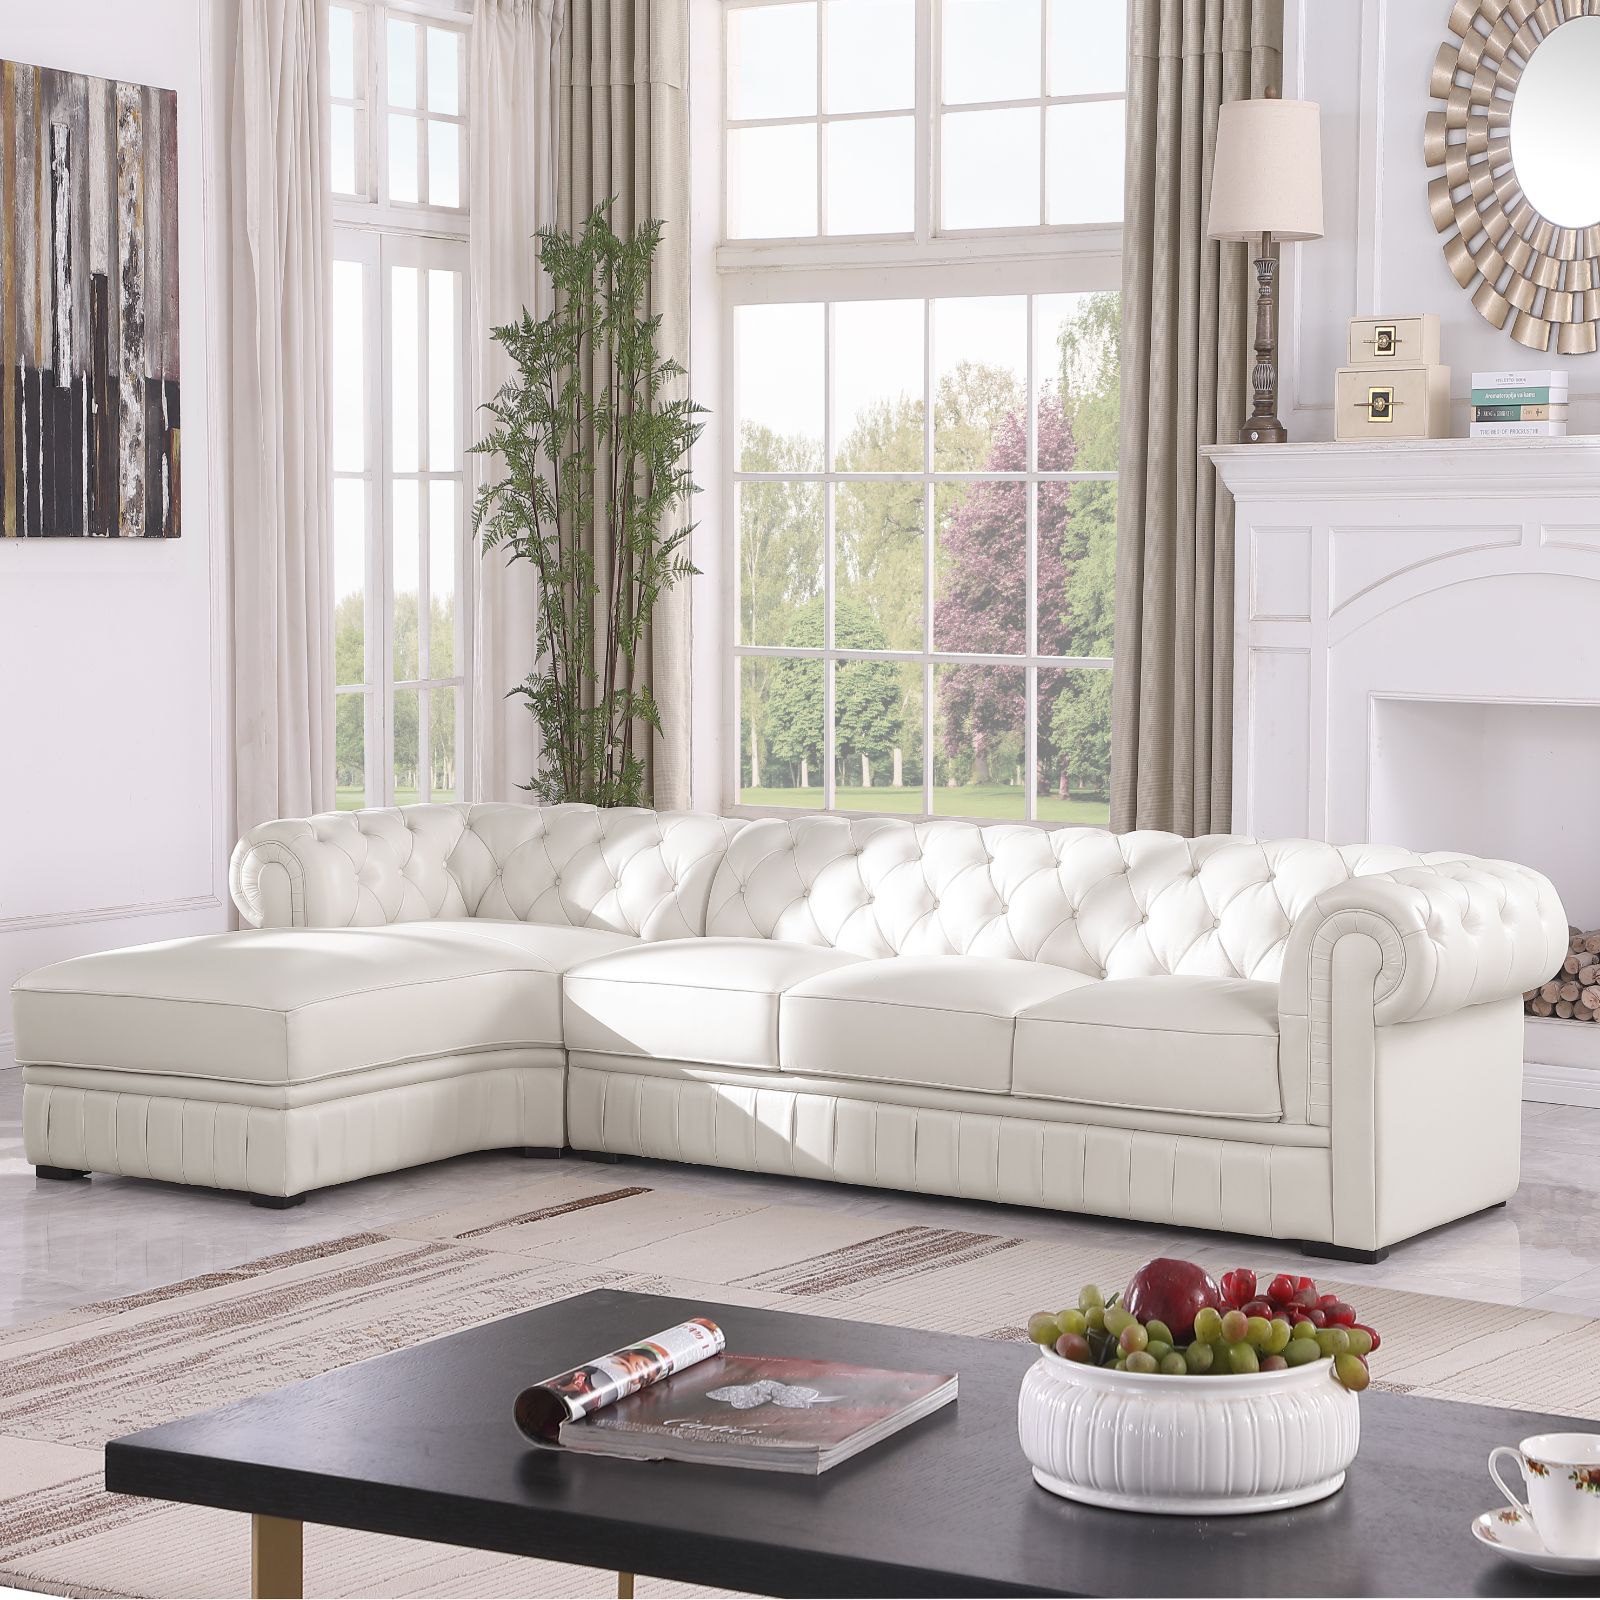 Ainehome White Cow Top Leather 2-Piece Living Room Sofa Set